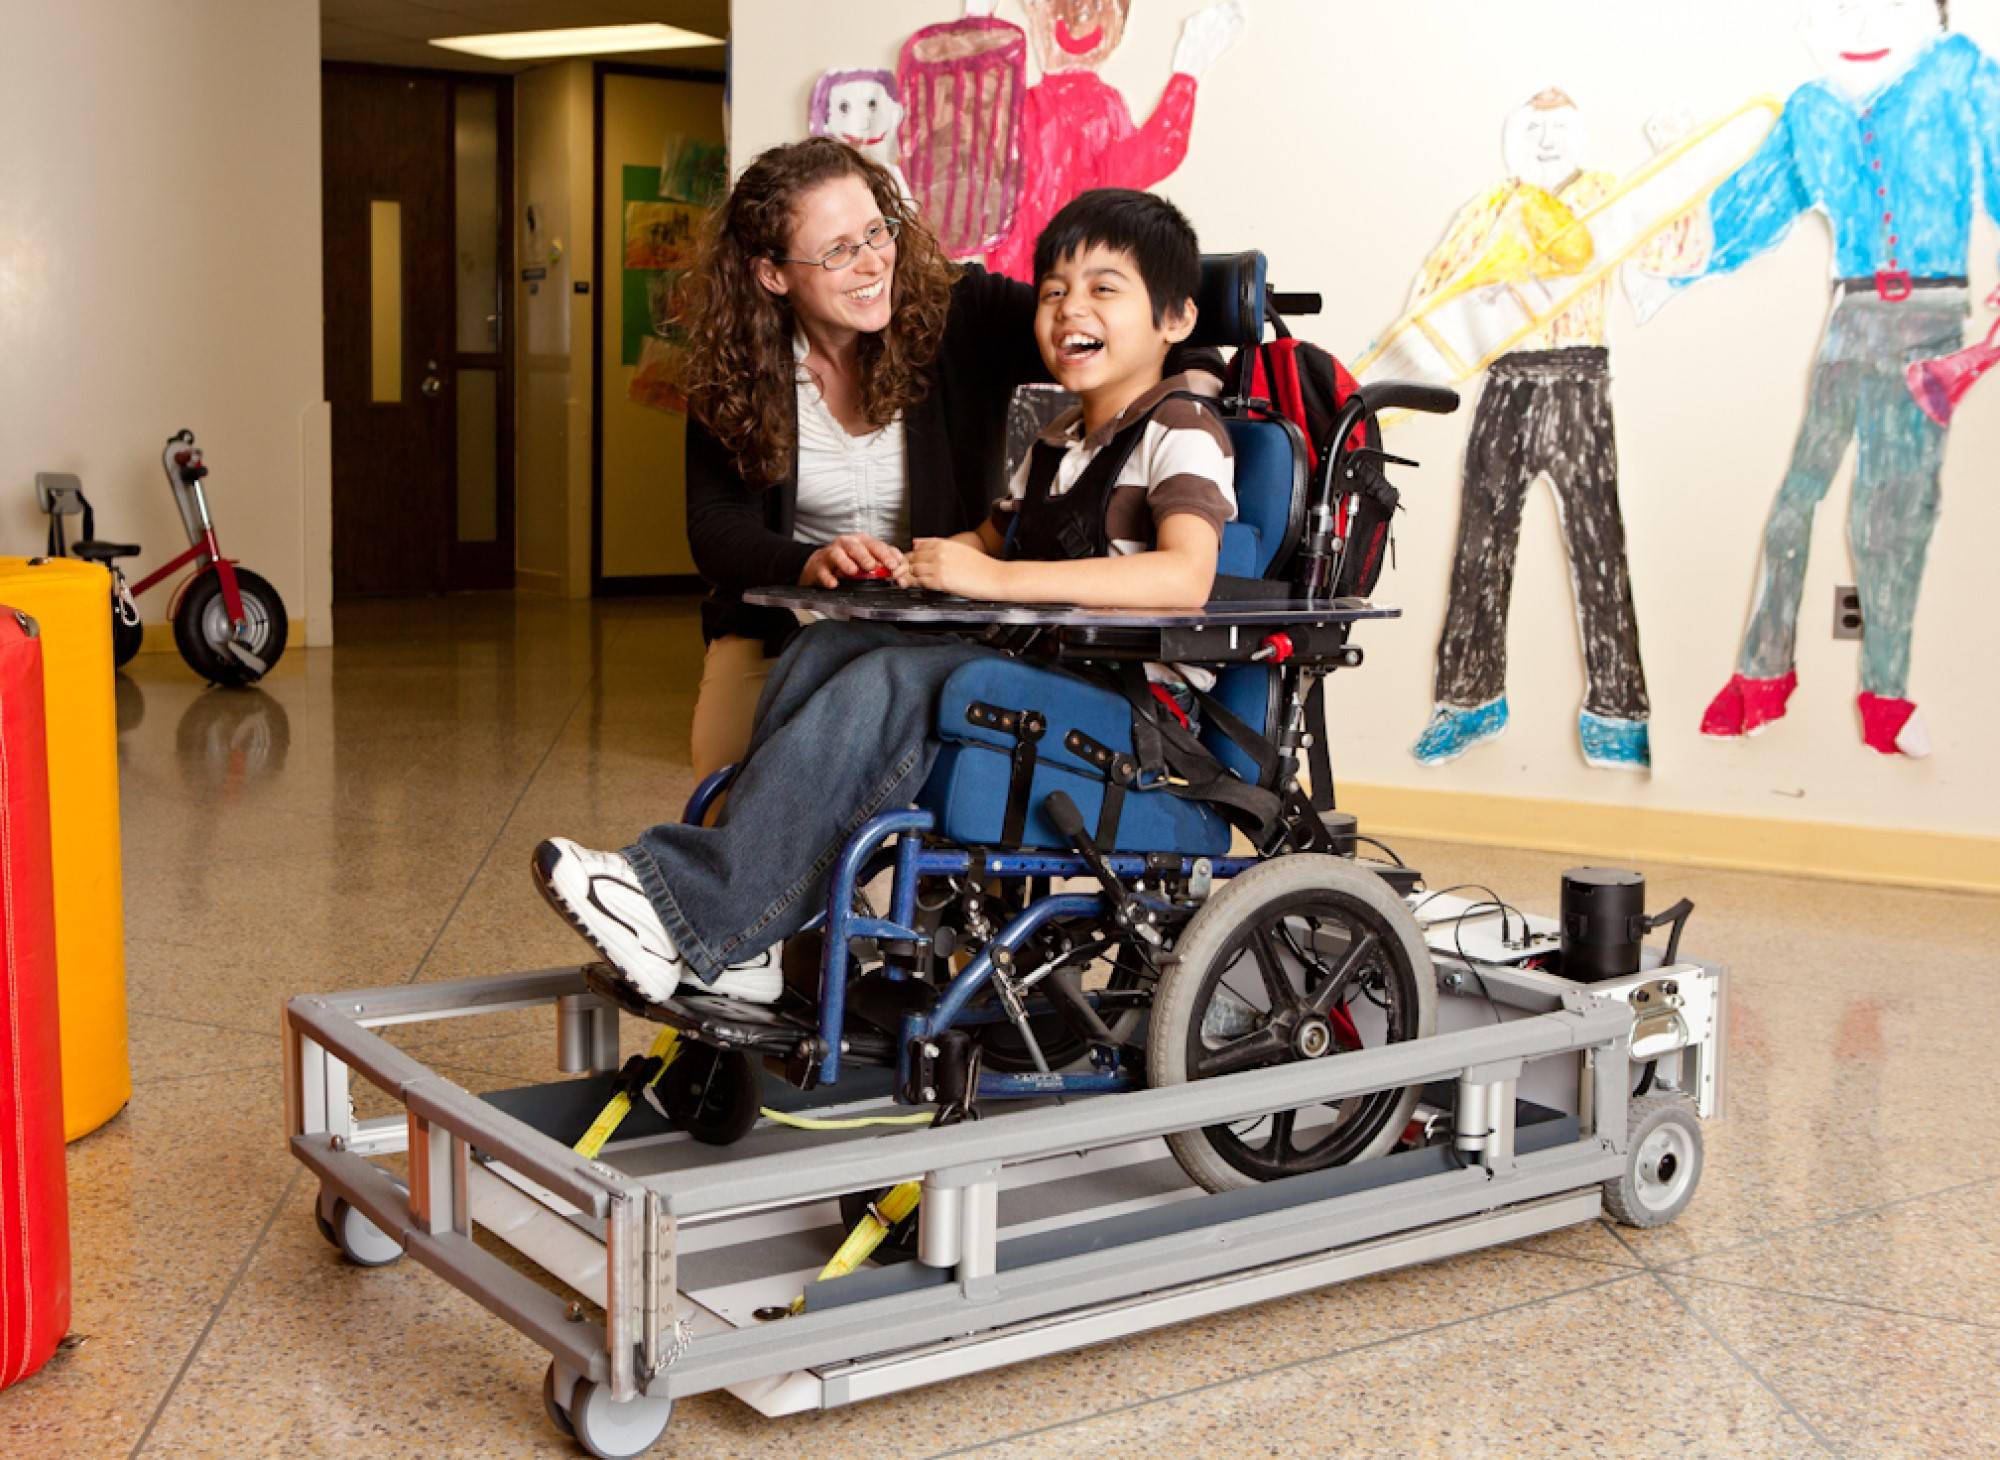 a woman kneels next to a child in a mobility aid